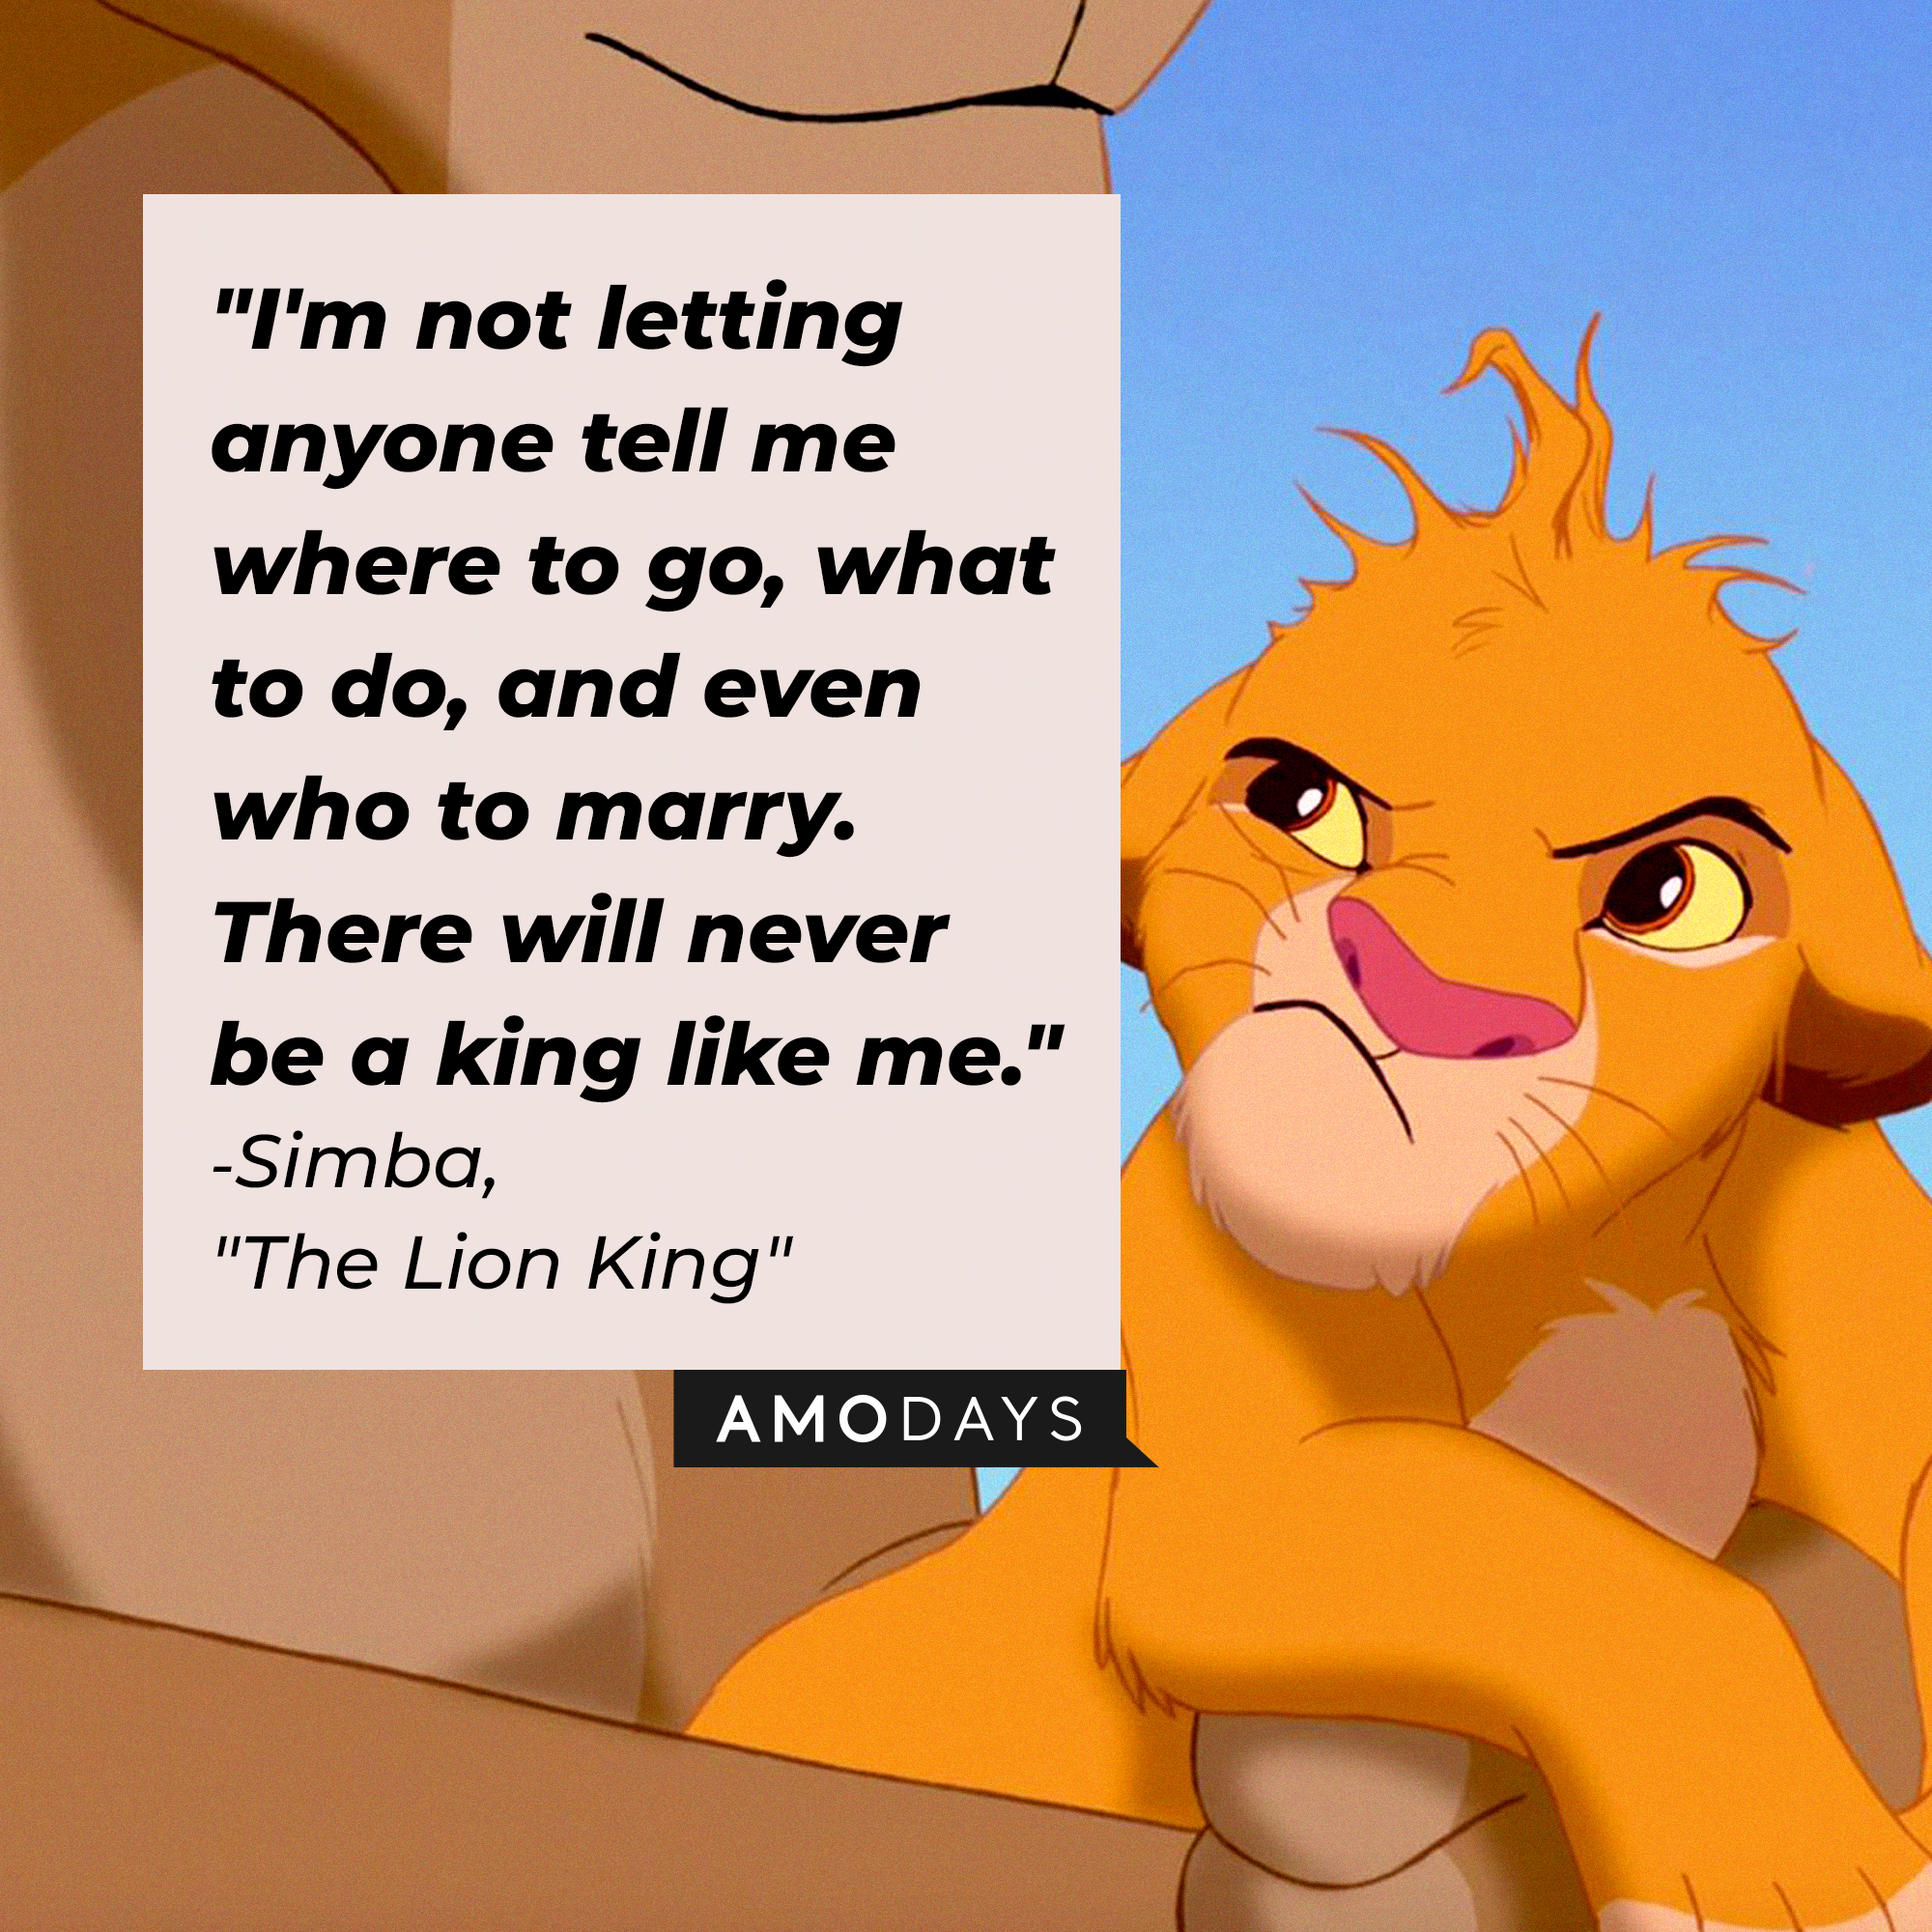 Simba with his quote: "I'm not letting anyone tell me where to go, what to do, and even who to marry. There will never be a king like me." | Source: Facebook.com/DisneyTheLionKing